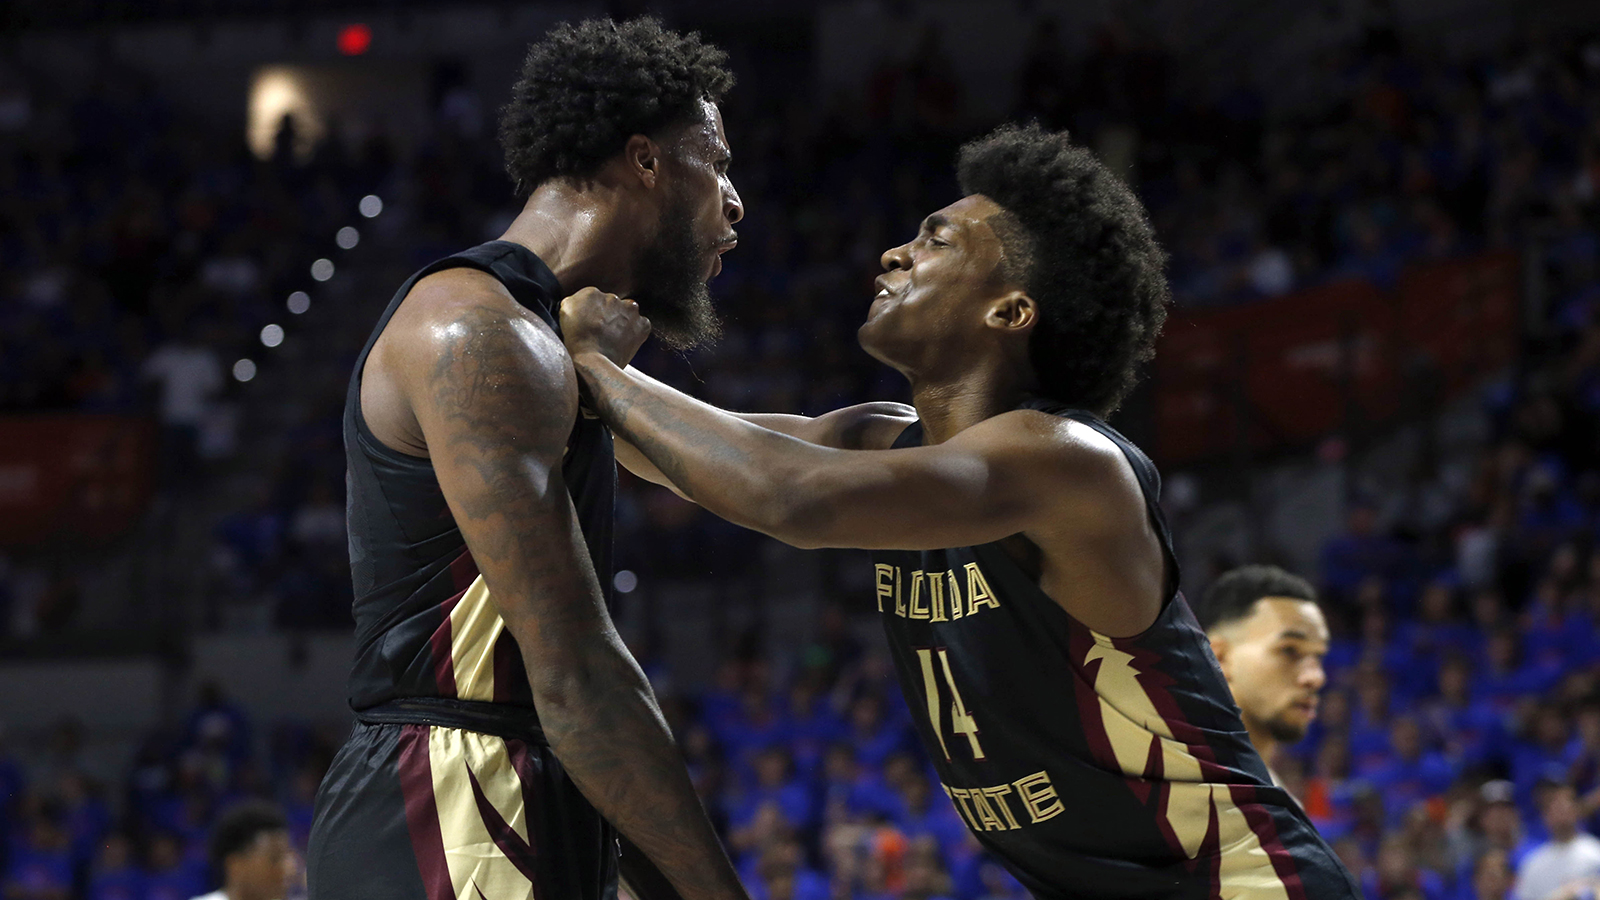 Terence Mann helps FSU dismantle rival Florida to remain undefeated